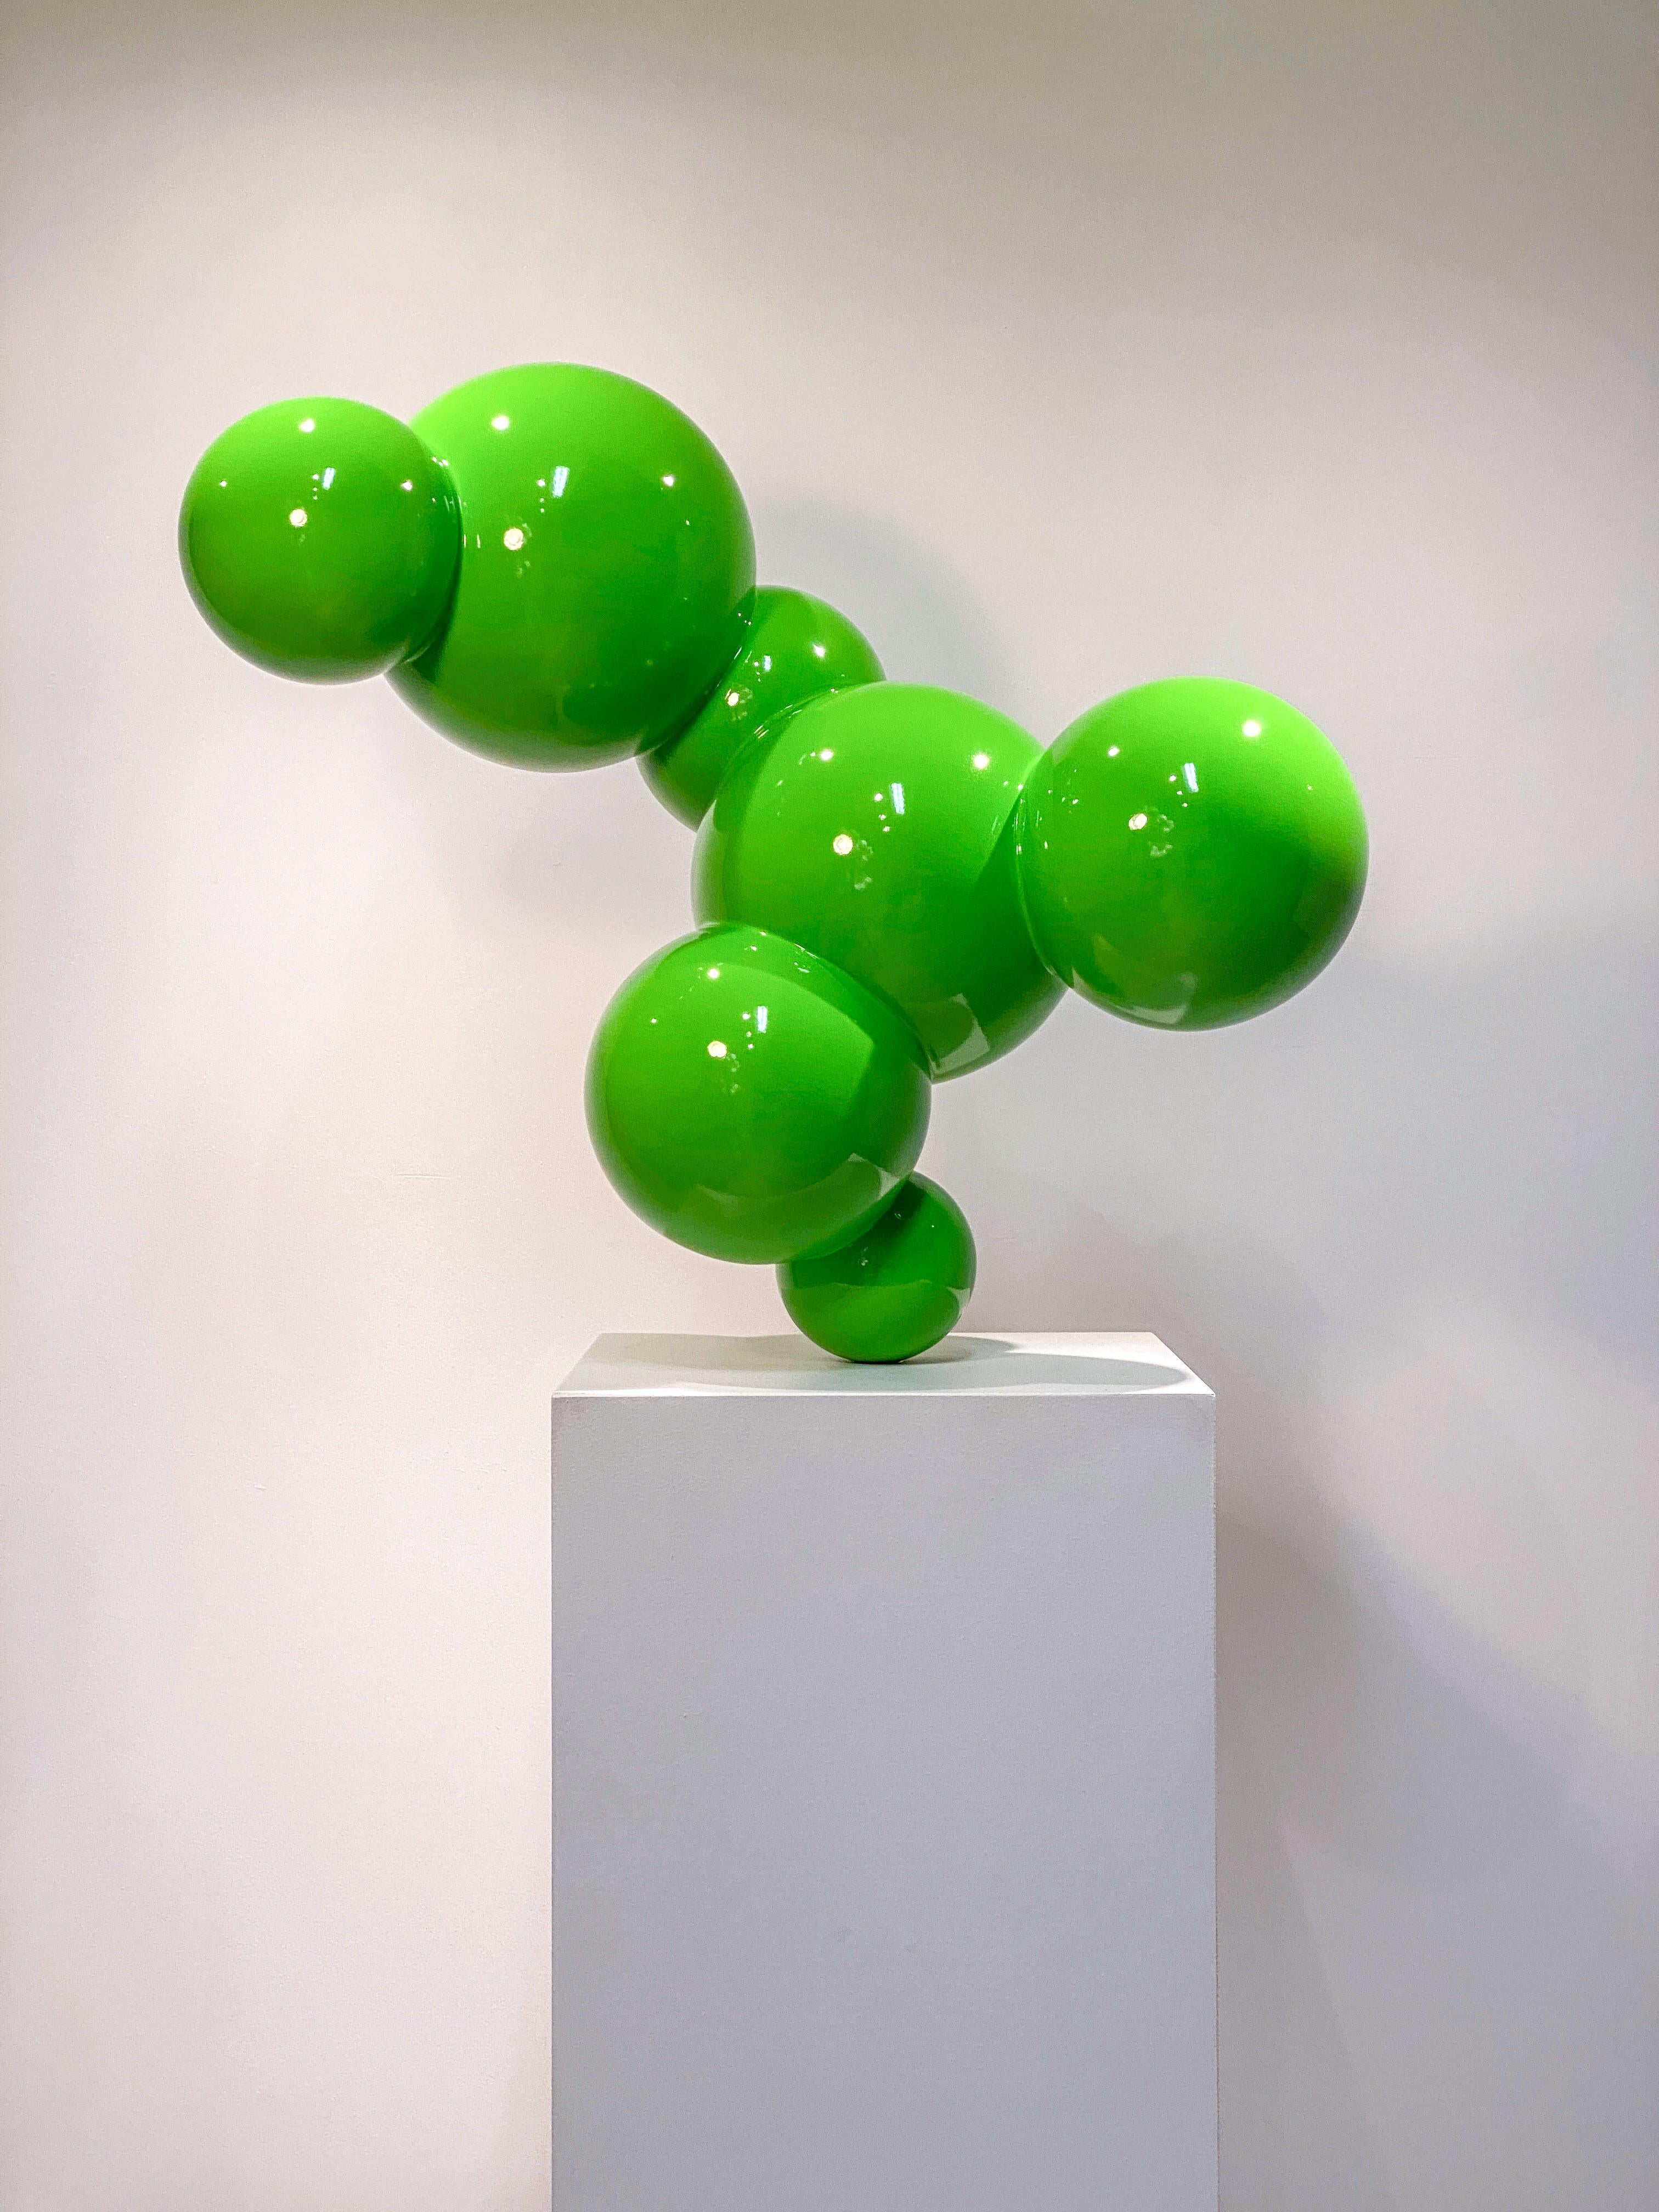 Algae 3 - green, polished, geometric abstract, painted stainless steel sculpture - Abstract Sculpture by Alexander Caldwell